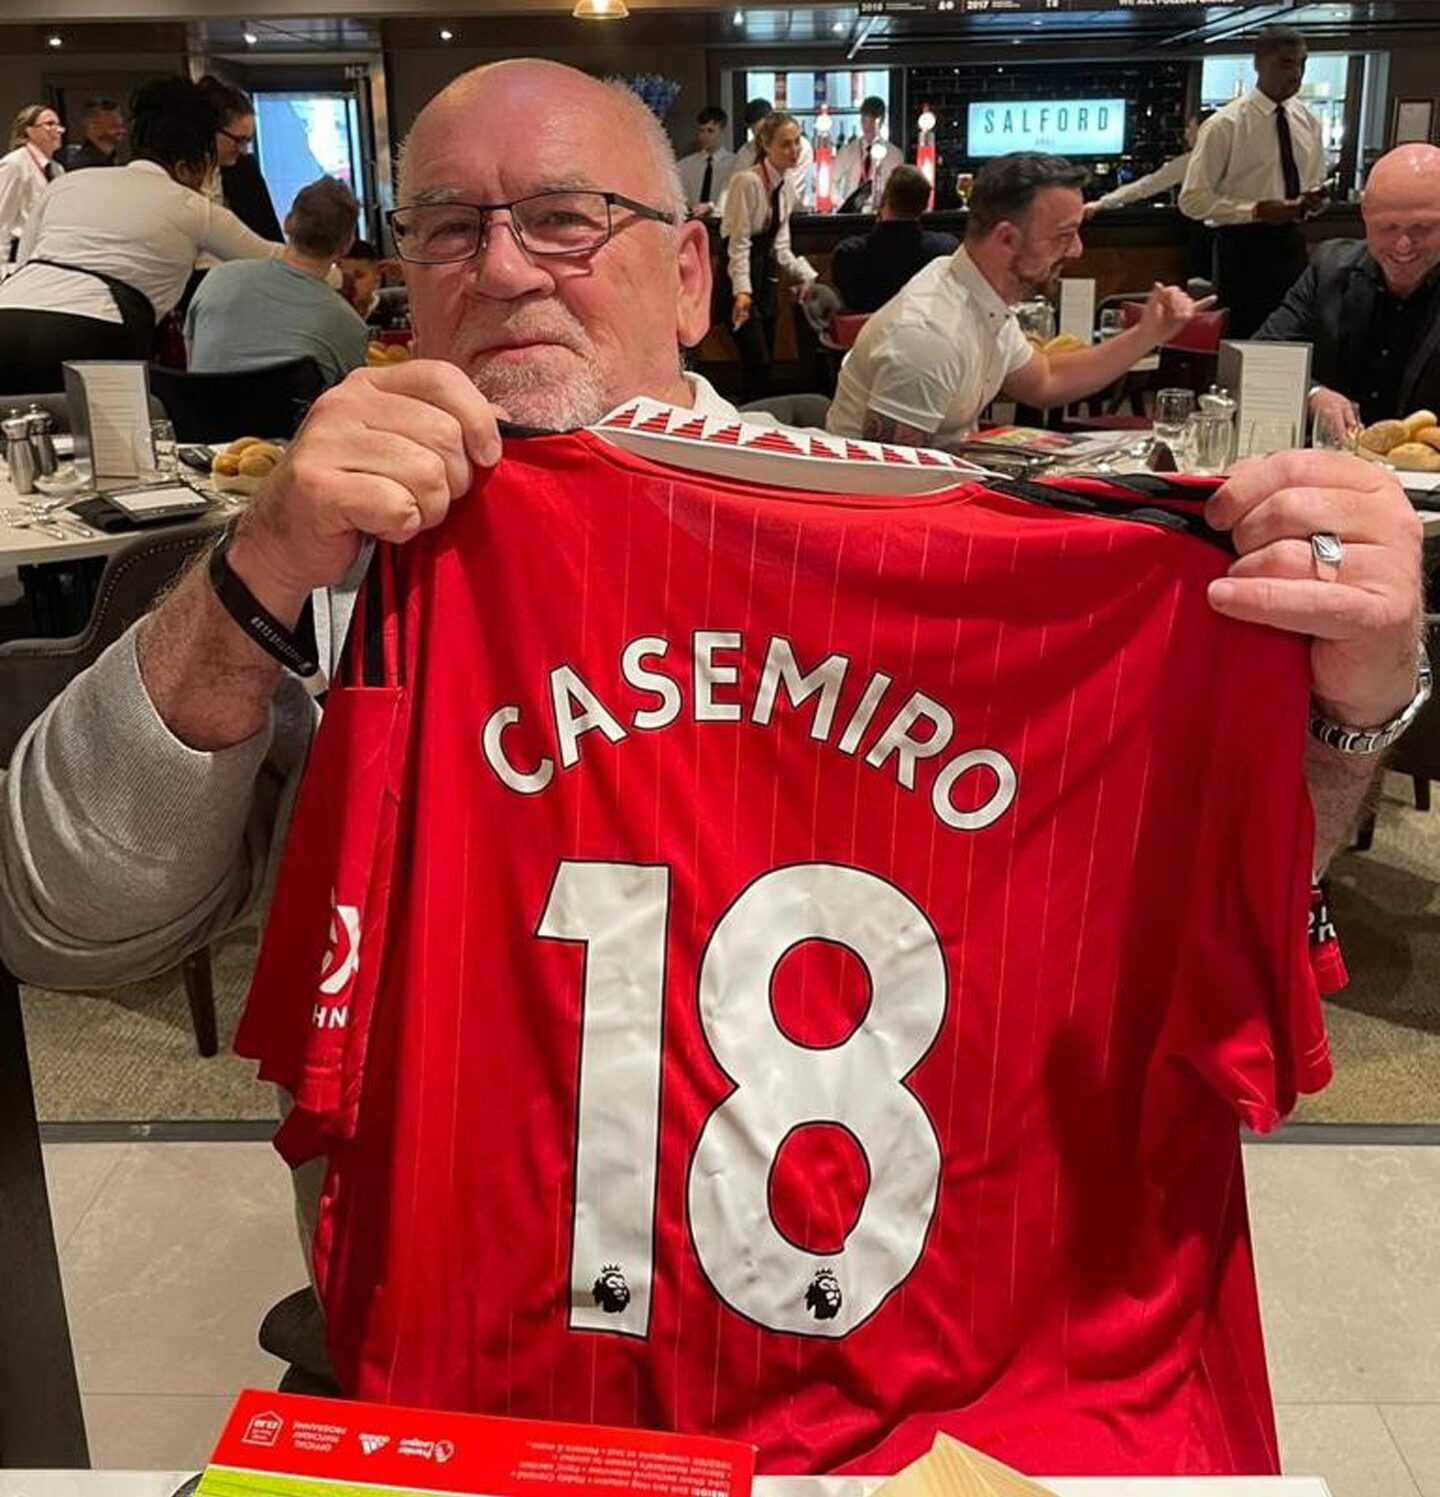 Malcolm Ritchie holding up a Manchester United shirt with Casemiro 18 on the back. 